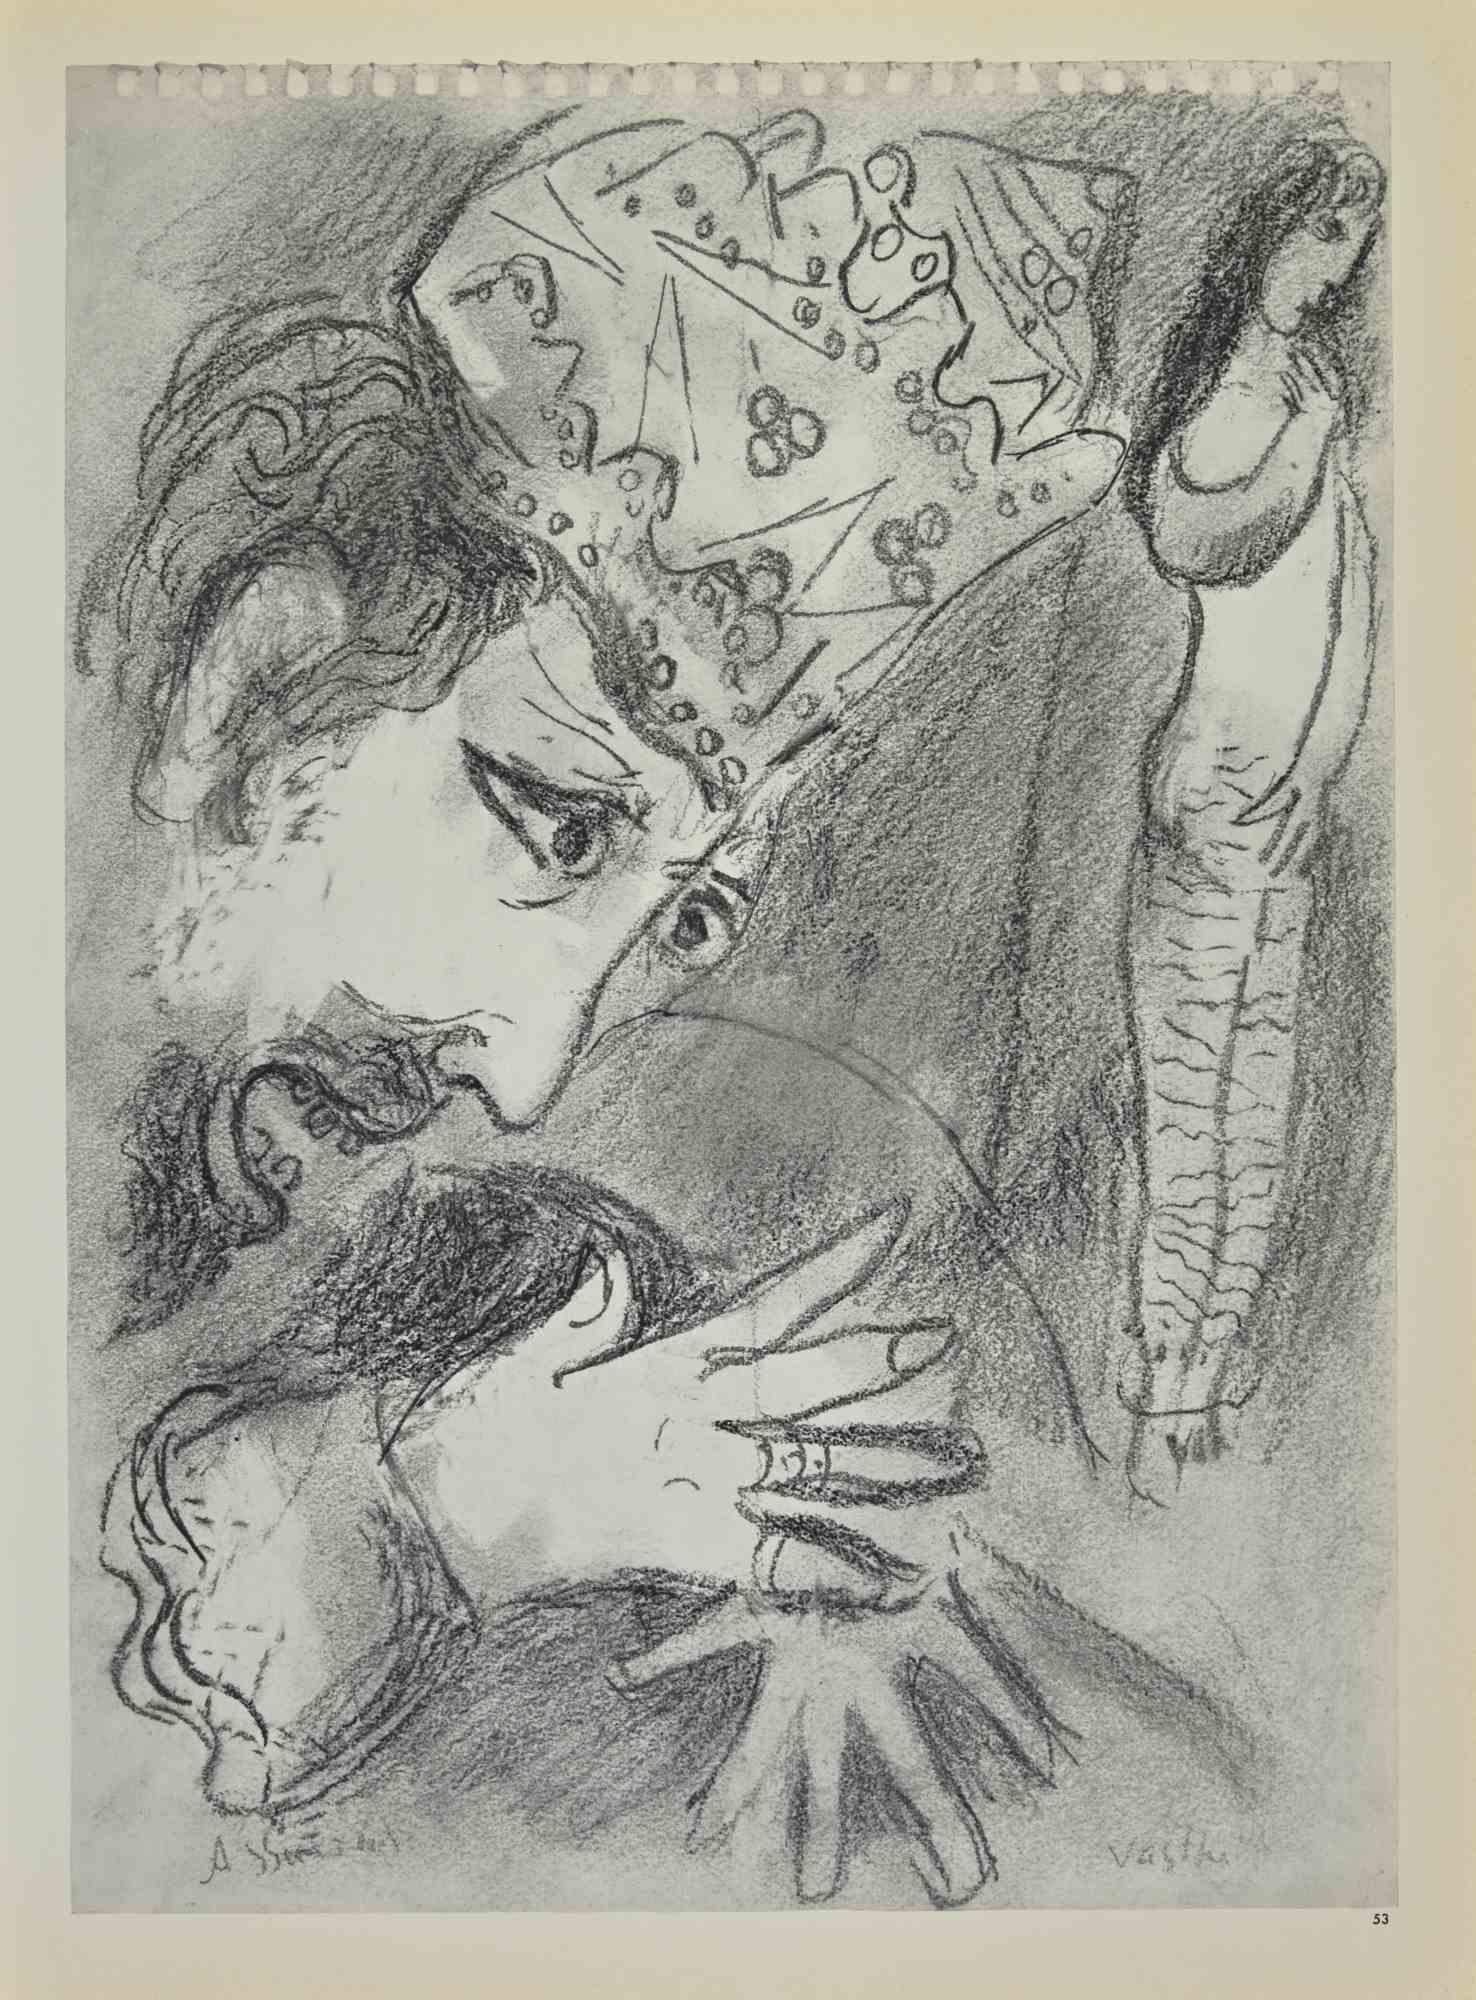 Untitled is an artwork realized by March Chagall, 1960s.

Lithograph on brown-toned paper, no signature.

Lithograph on both sheets.

Edition of 6500 unsigned lithographs. Printed by Mourlot and published by Tériade, Paris.

Ref. Mourlot, F.,